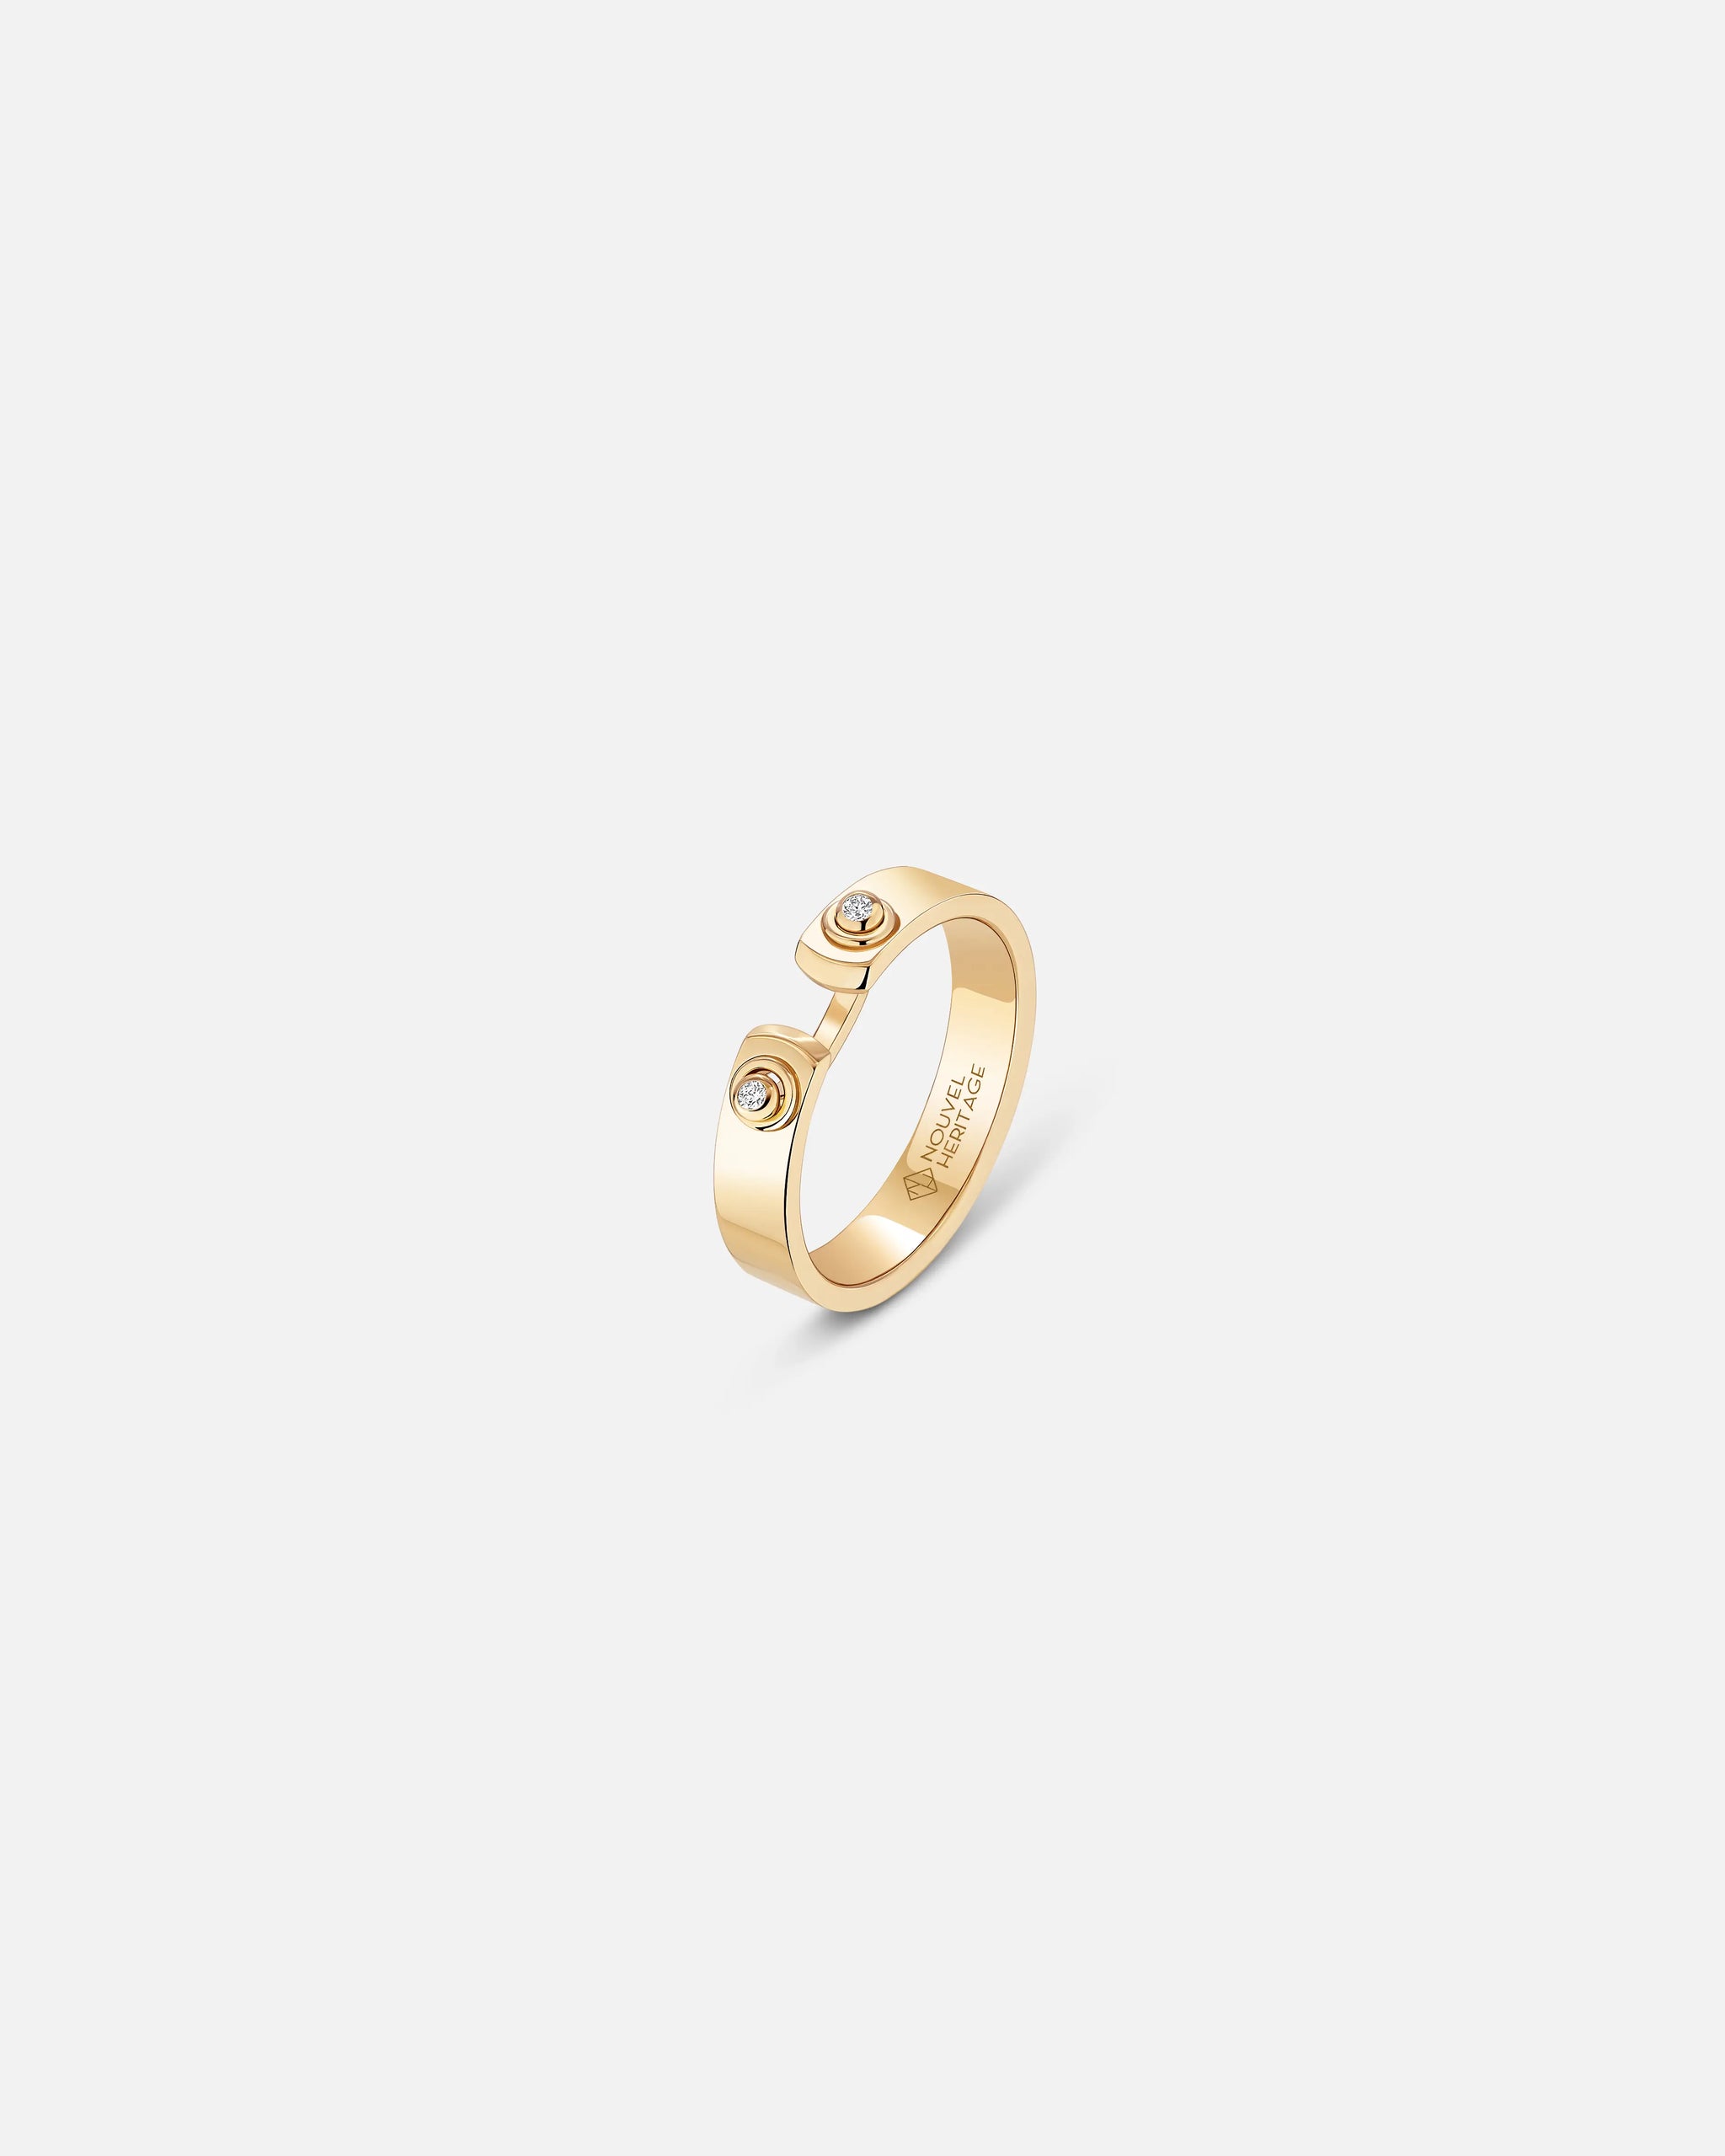 Monday Morning Mood Ring in Yellow Gold - 1 - Nouvel Heritage